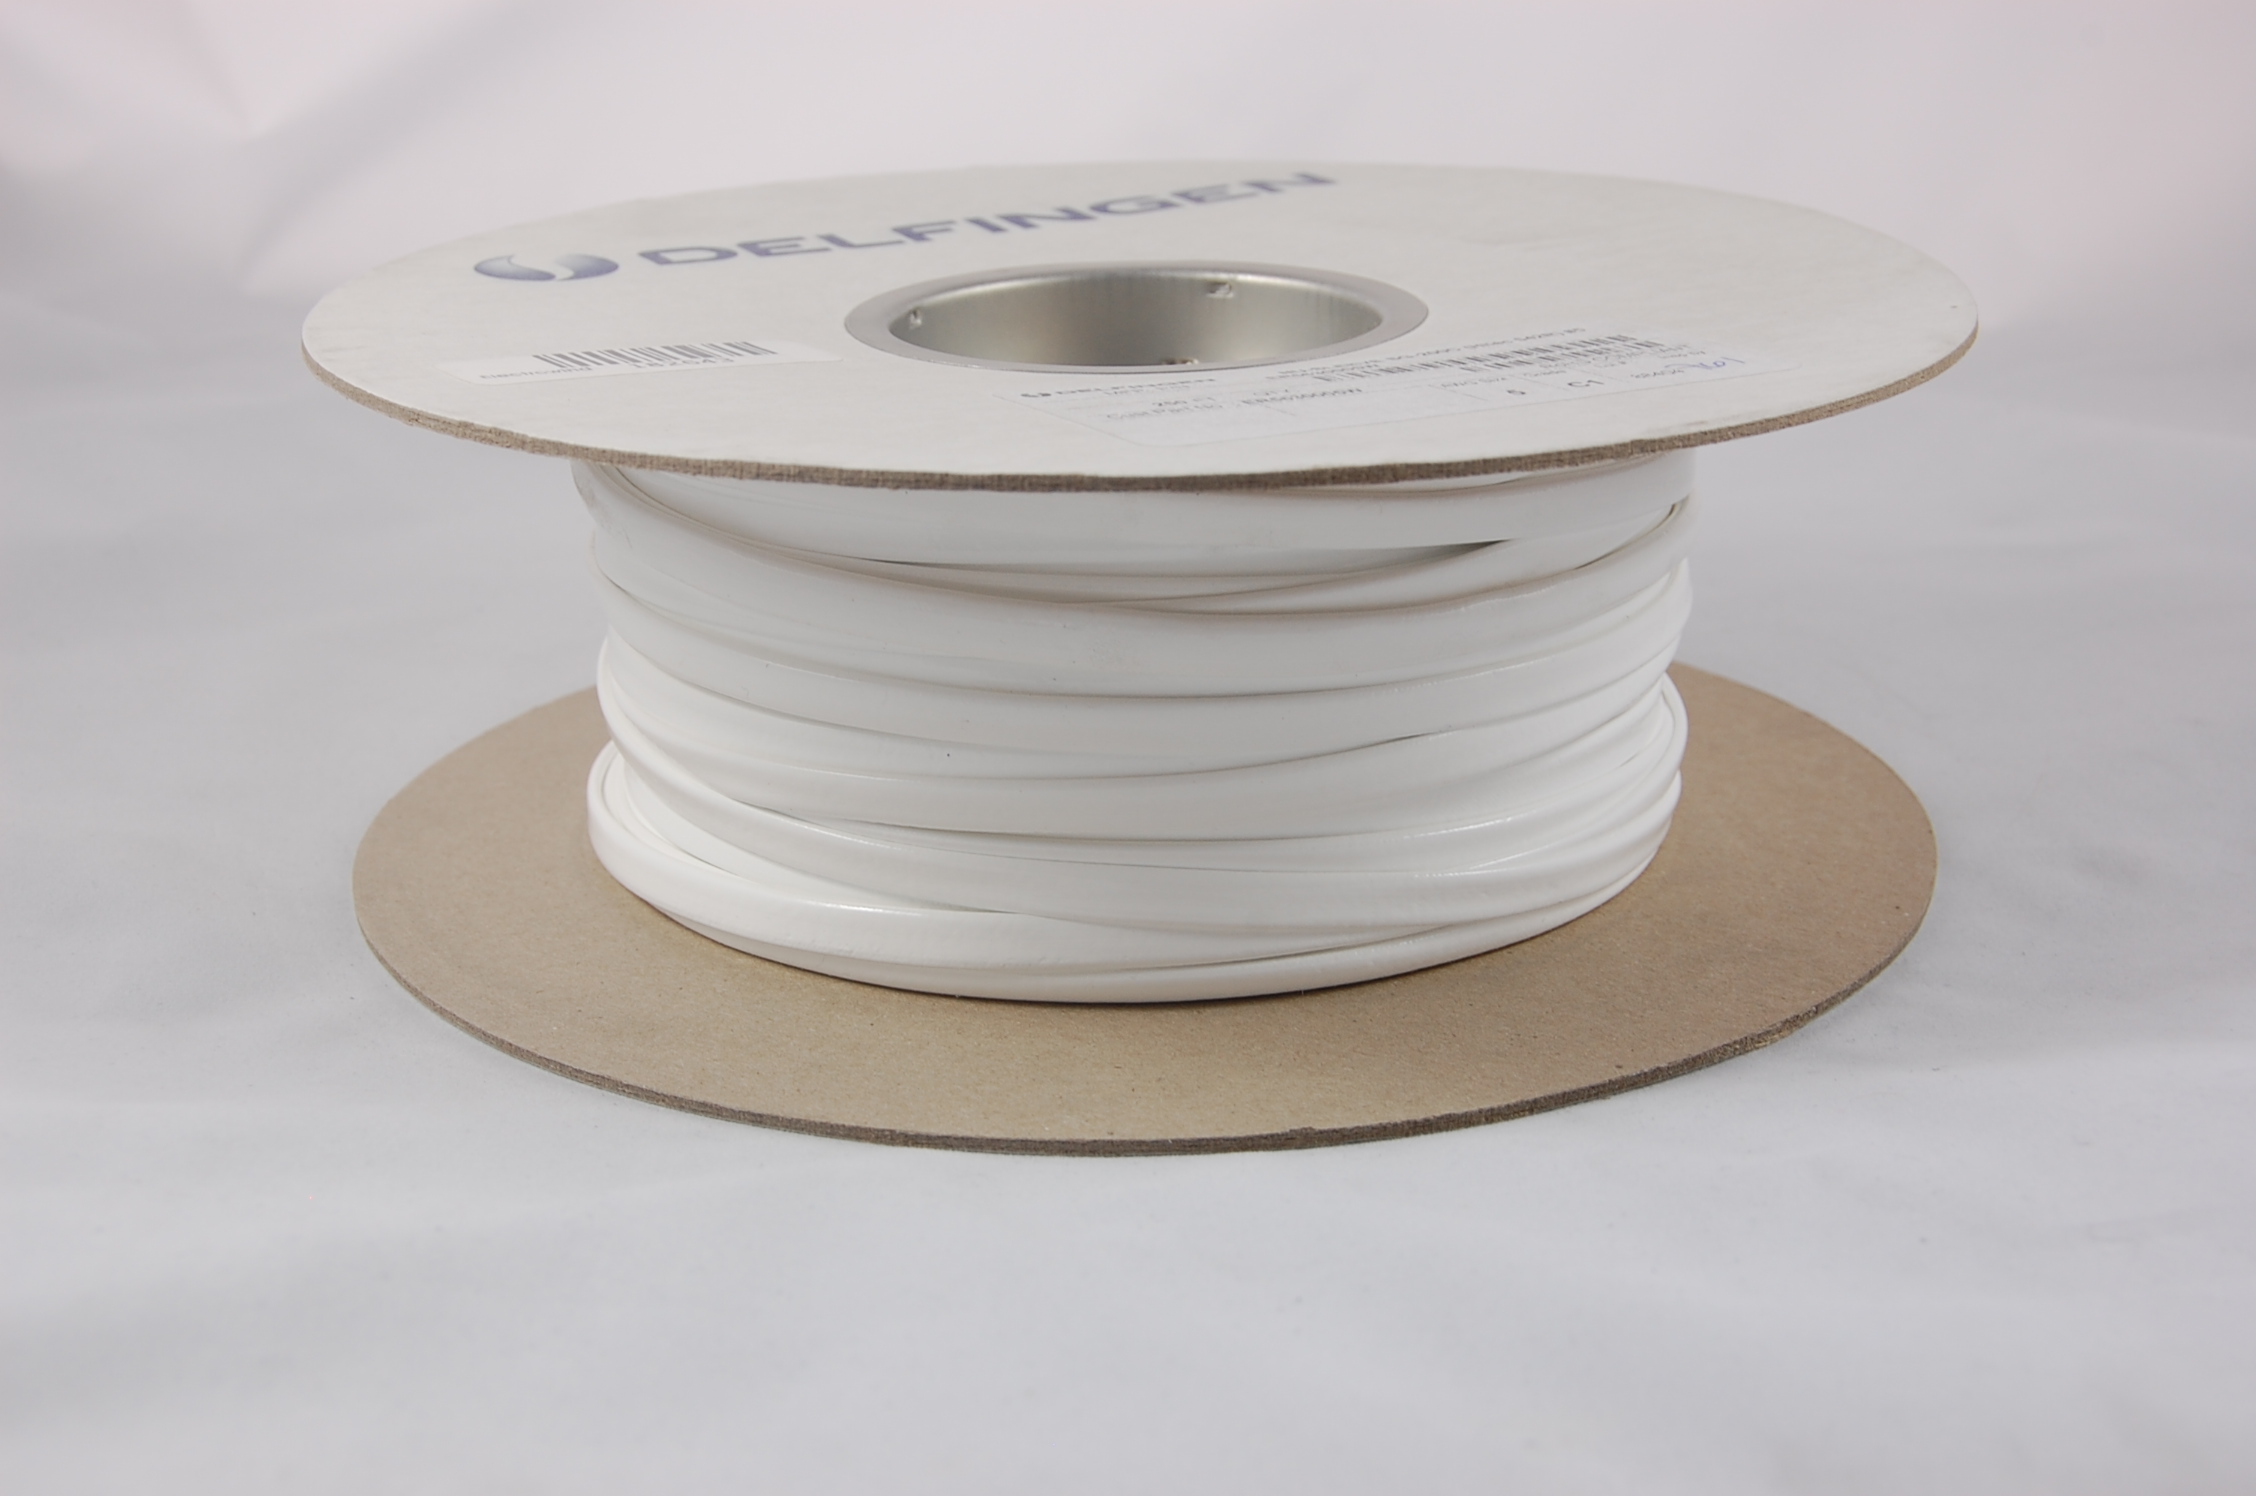 #15 AWG NU-SLEEVE SG-200 A (7000V) Silicone Rubber Coated Braided Fiberglass Sleeving (547F) 200°C, white, 500 FT per spool